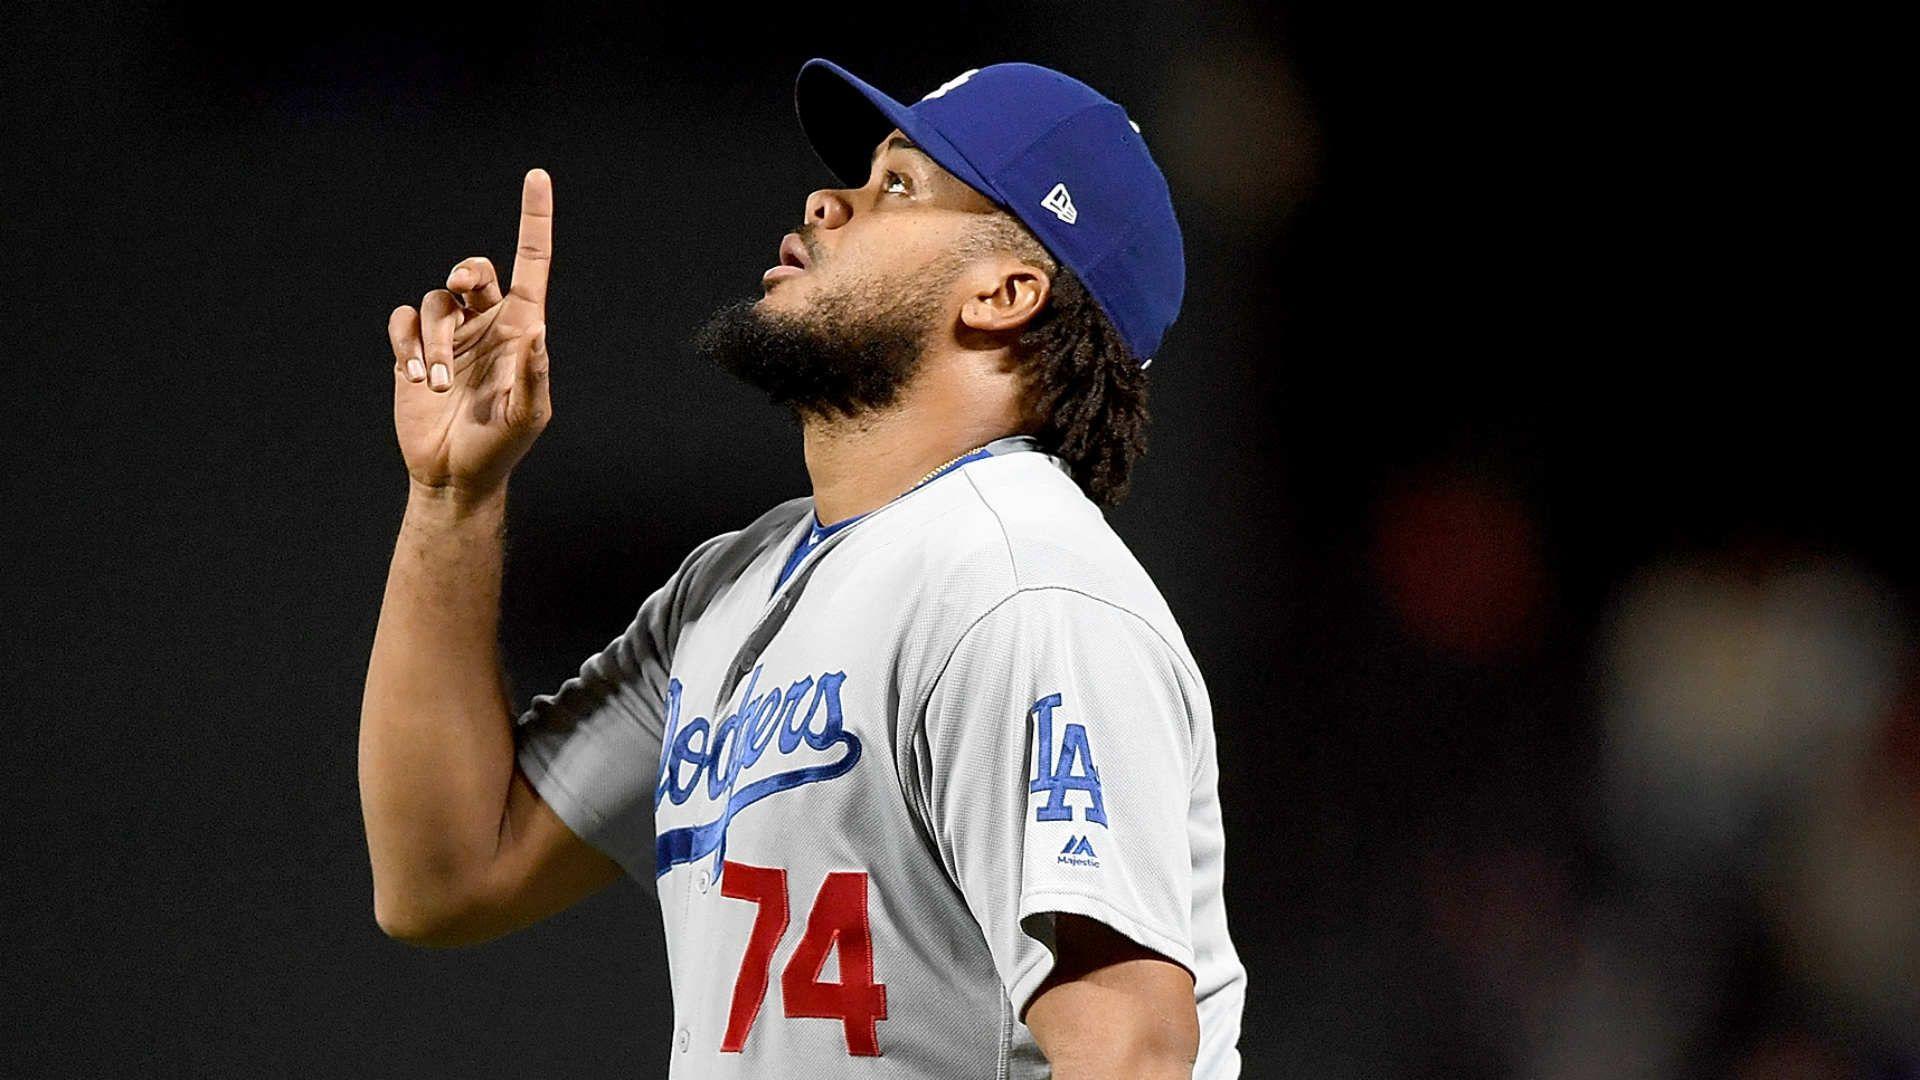 Dodgers closer Kenley Jansen sets MLB record for strikeouts